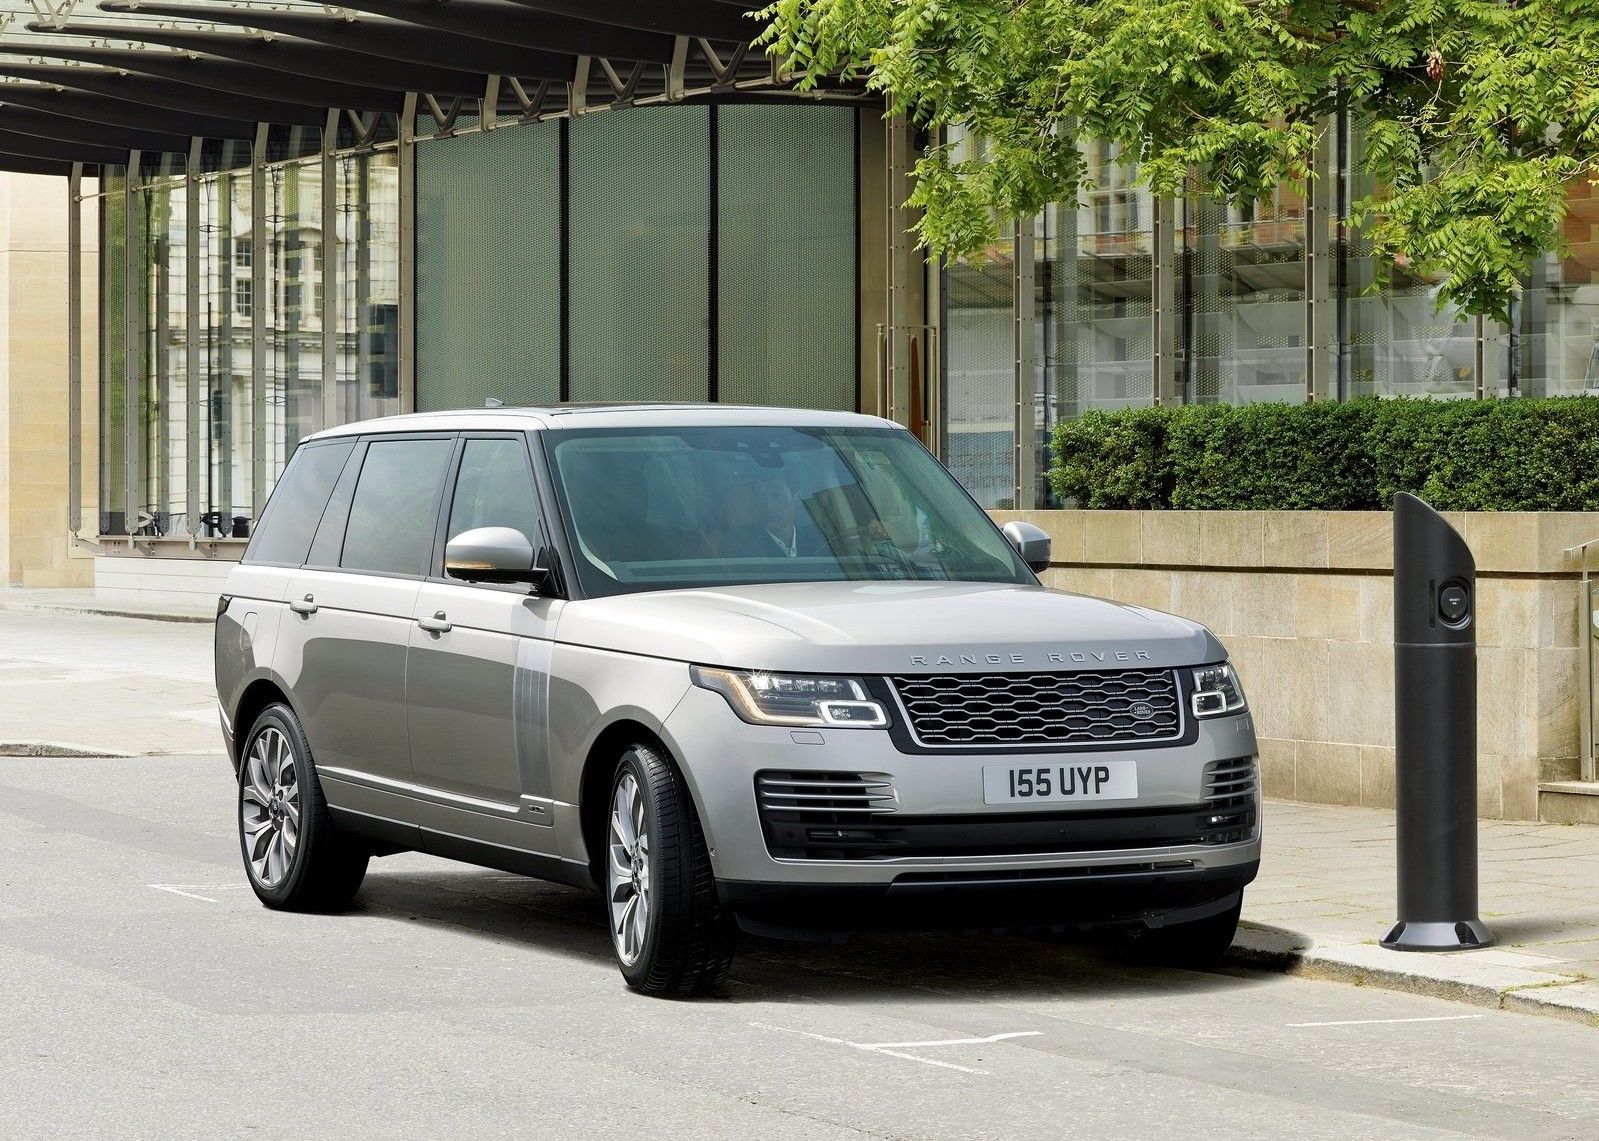 2018 Range Rover: The Ultimate SUV